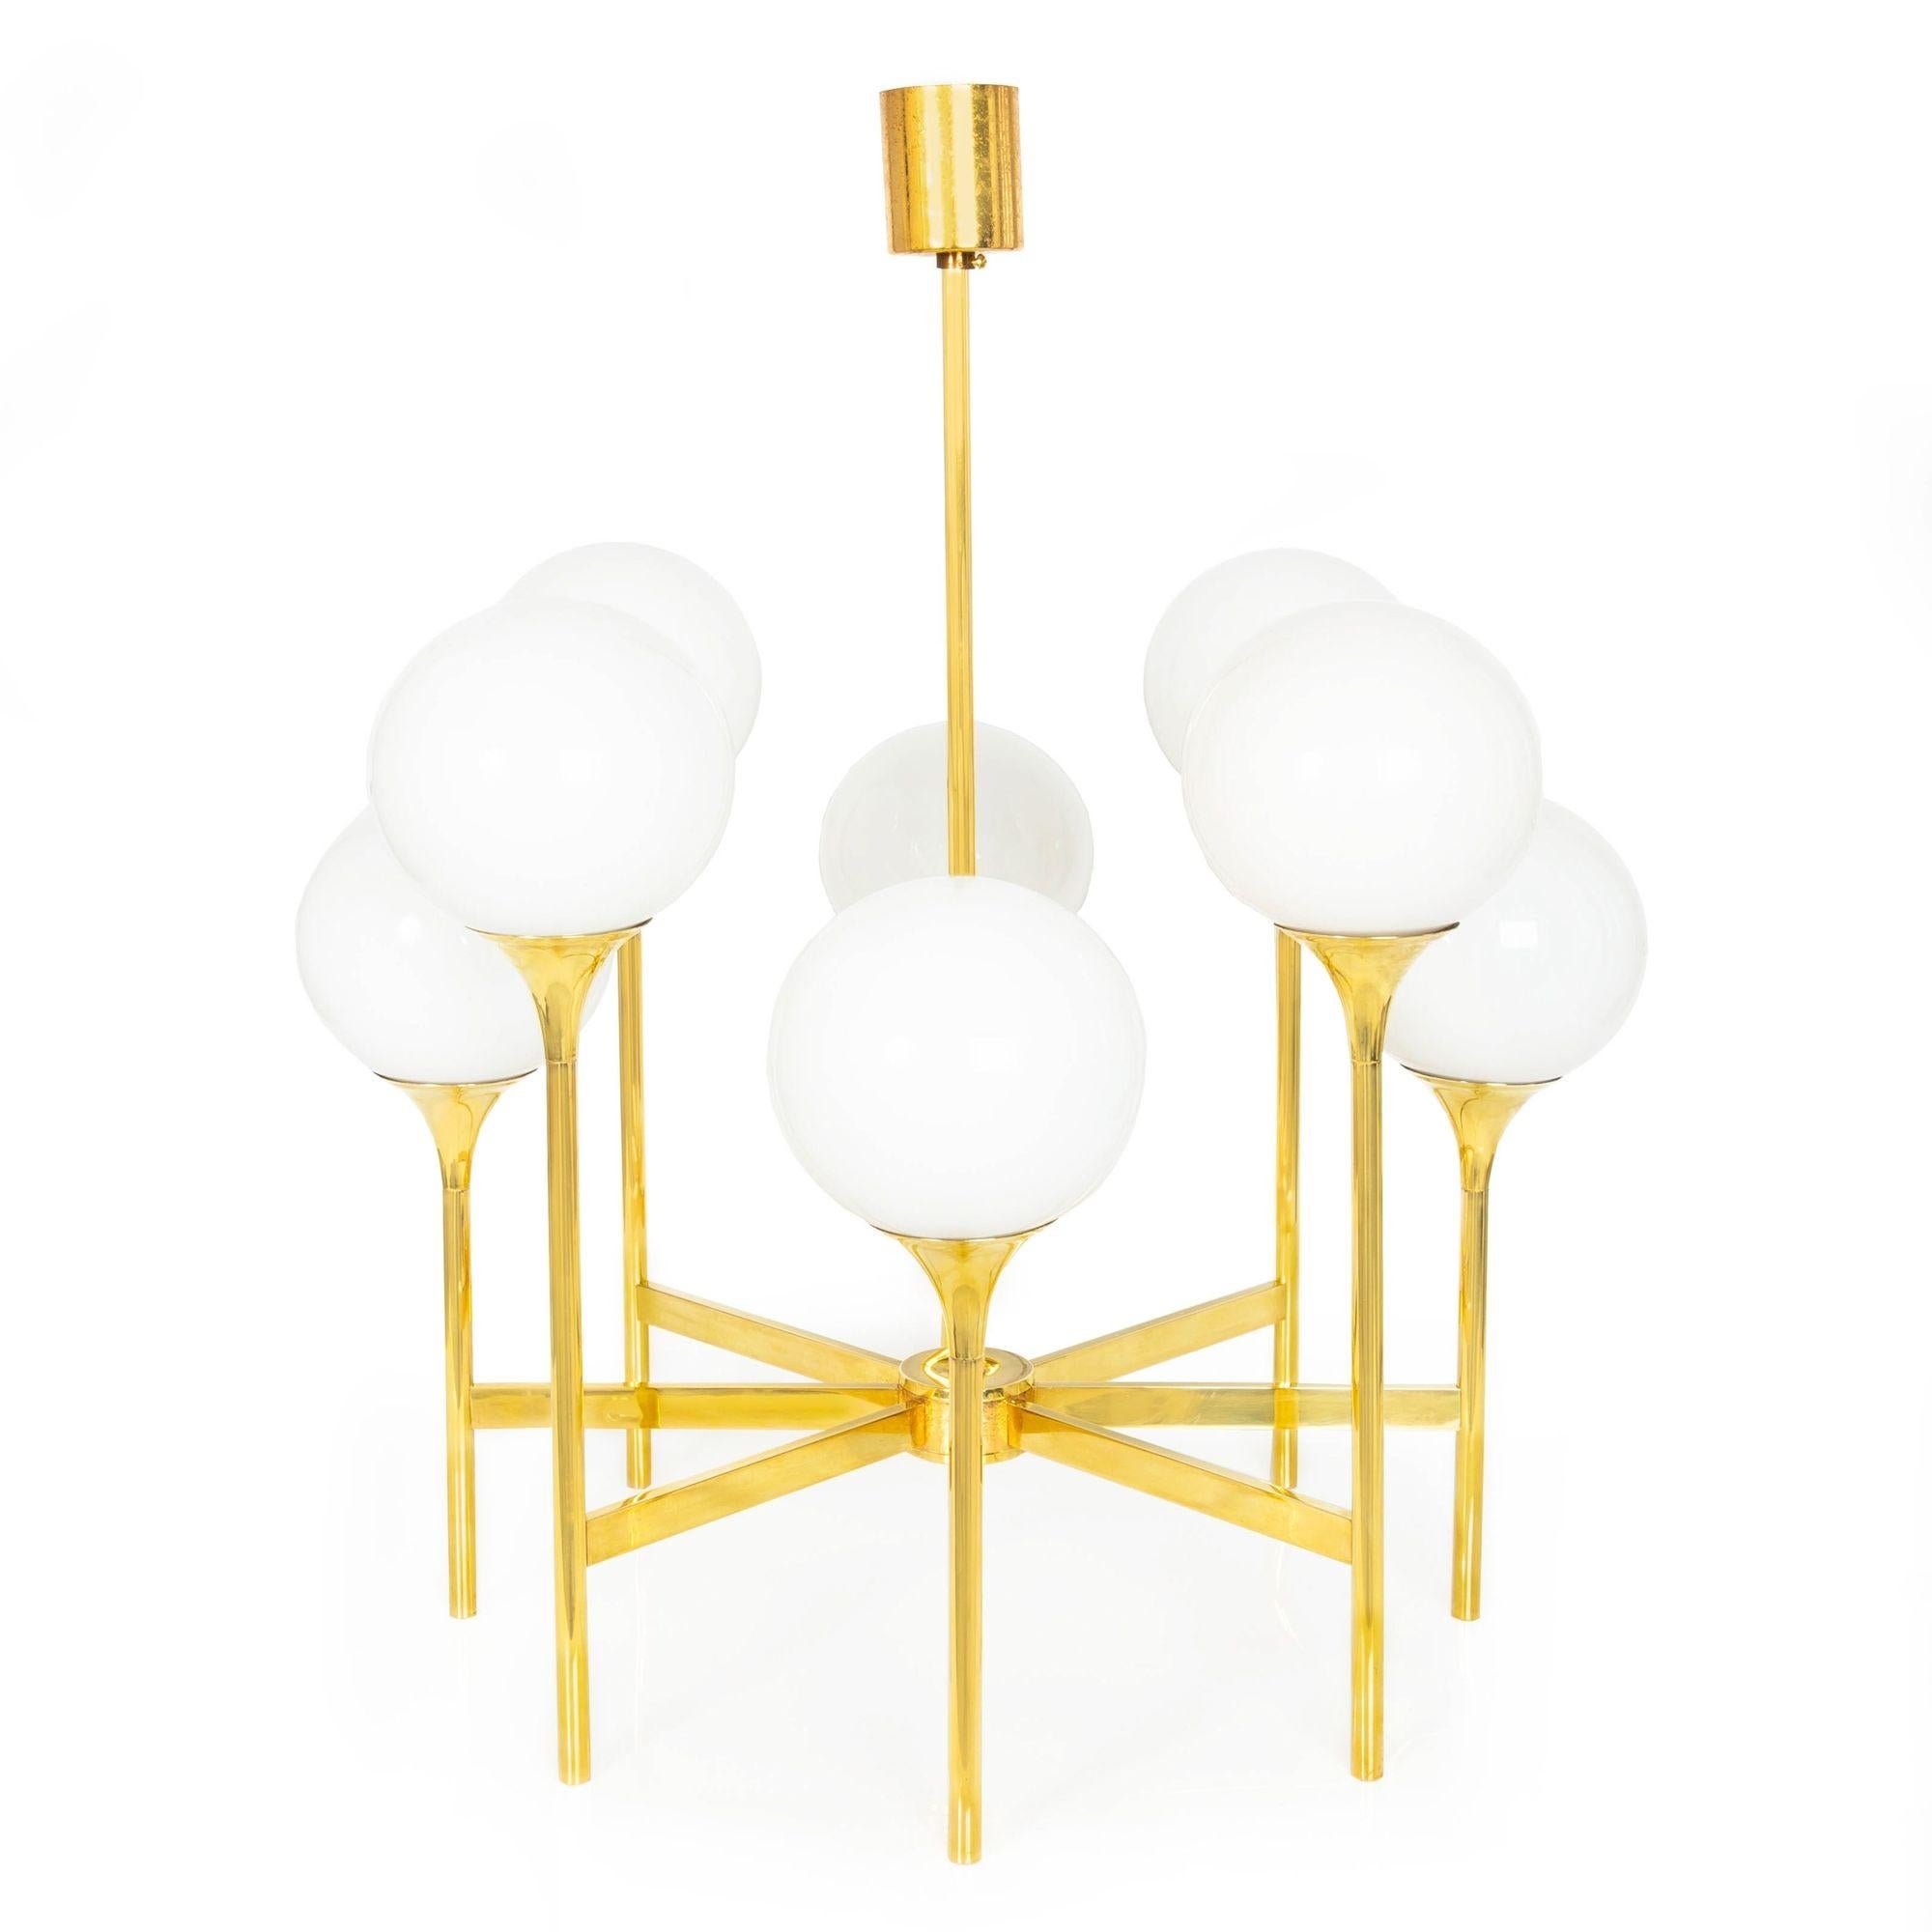 A MID-CENTURY POLISHED BRASS EIGHT-LIGHT CHANDELIER
Designed by Gaetano Sciolari ca. 1970  unmarked
Item # 311JBP02P

This sleek and austere chandelier is a quintessential representation of Gaetano Sciolari's design ethos from the 1970s. It features